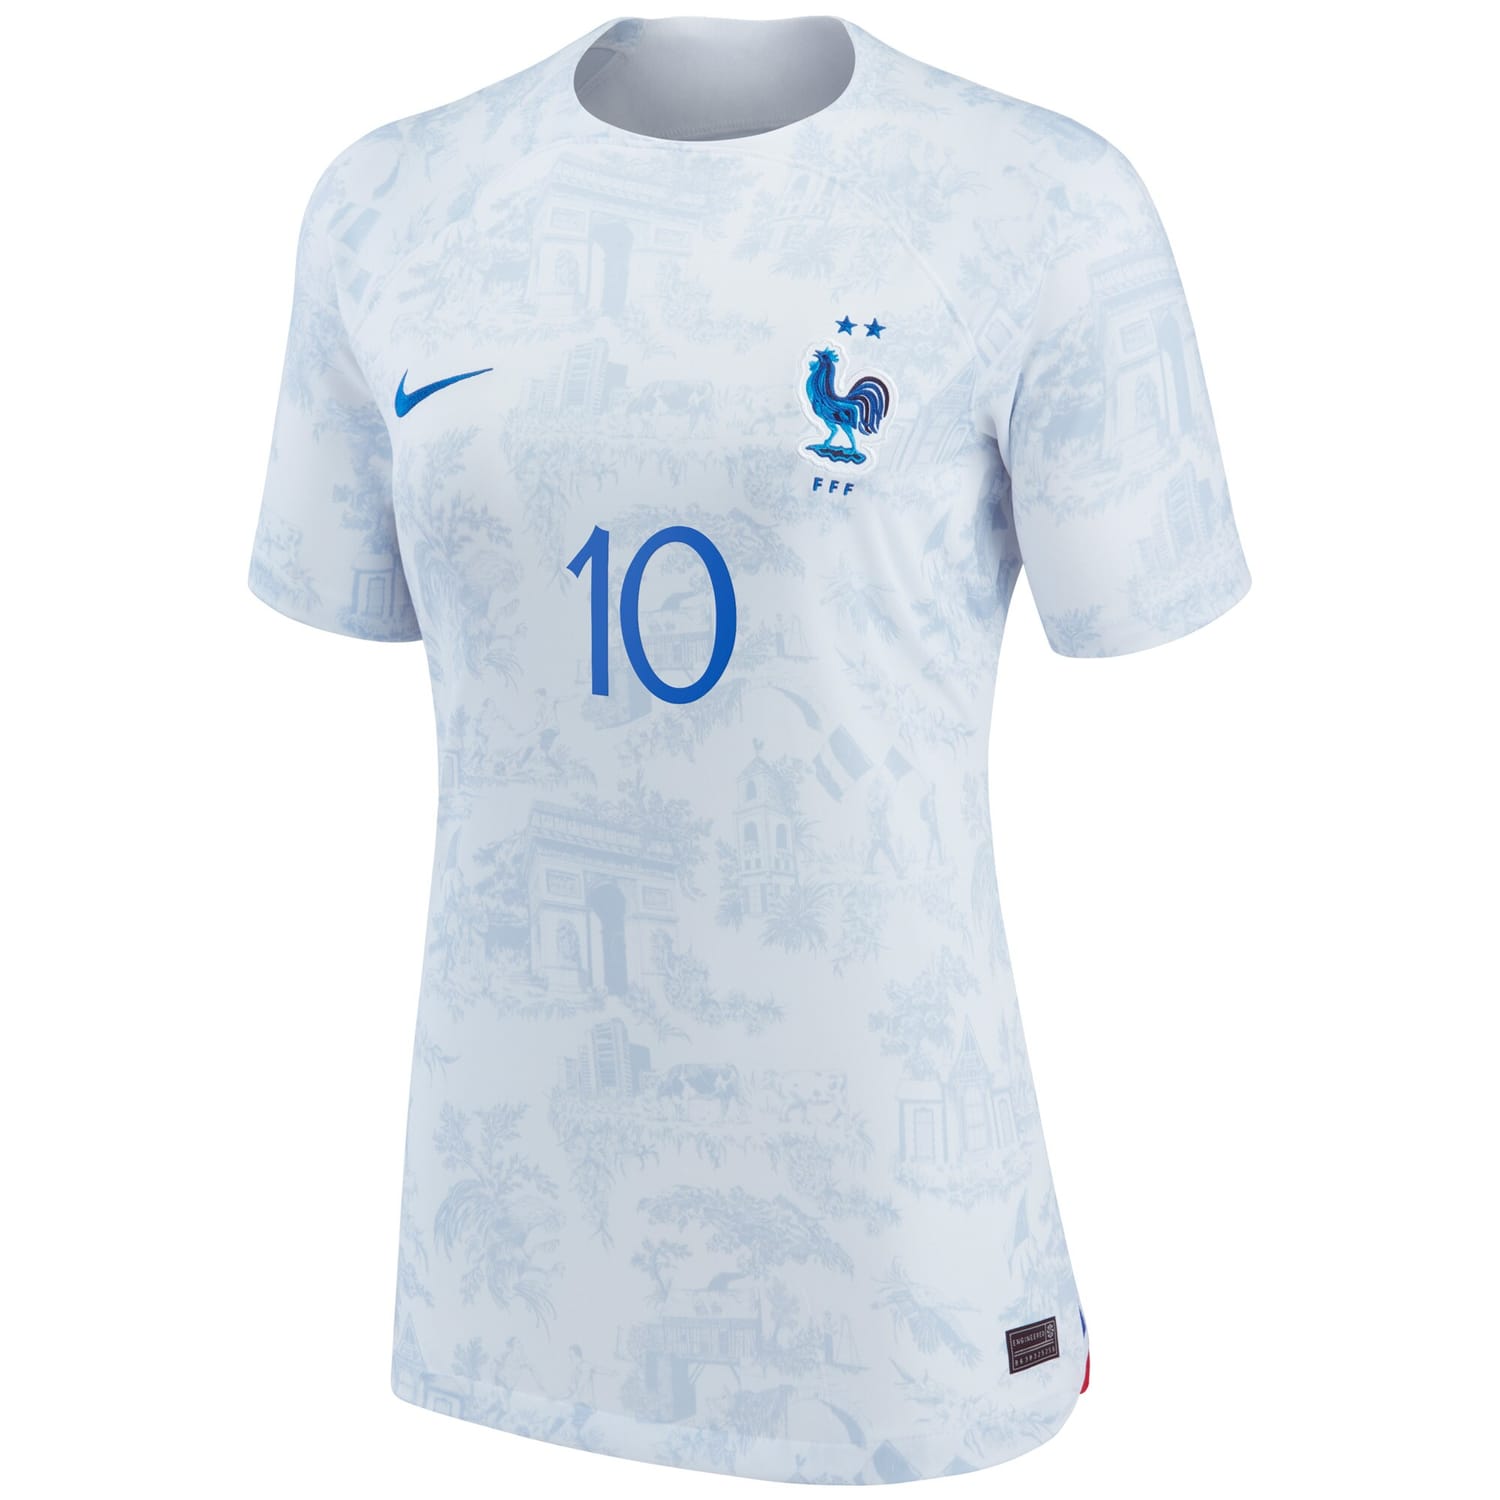 France National Team Away Jersey Shirt White 2022-23 player Kylian Mbappe printing for Women